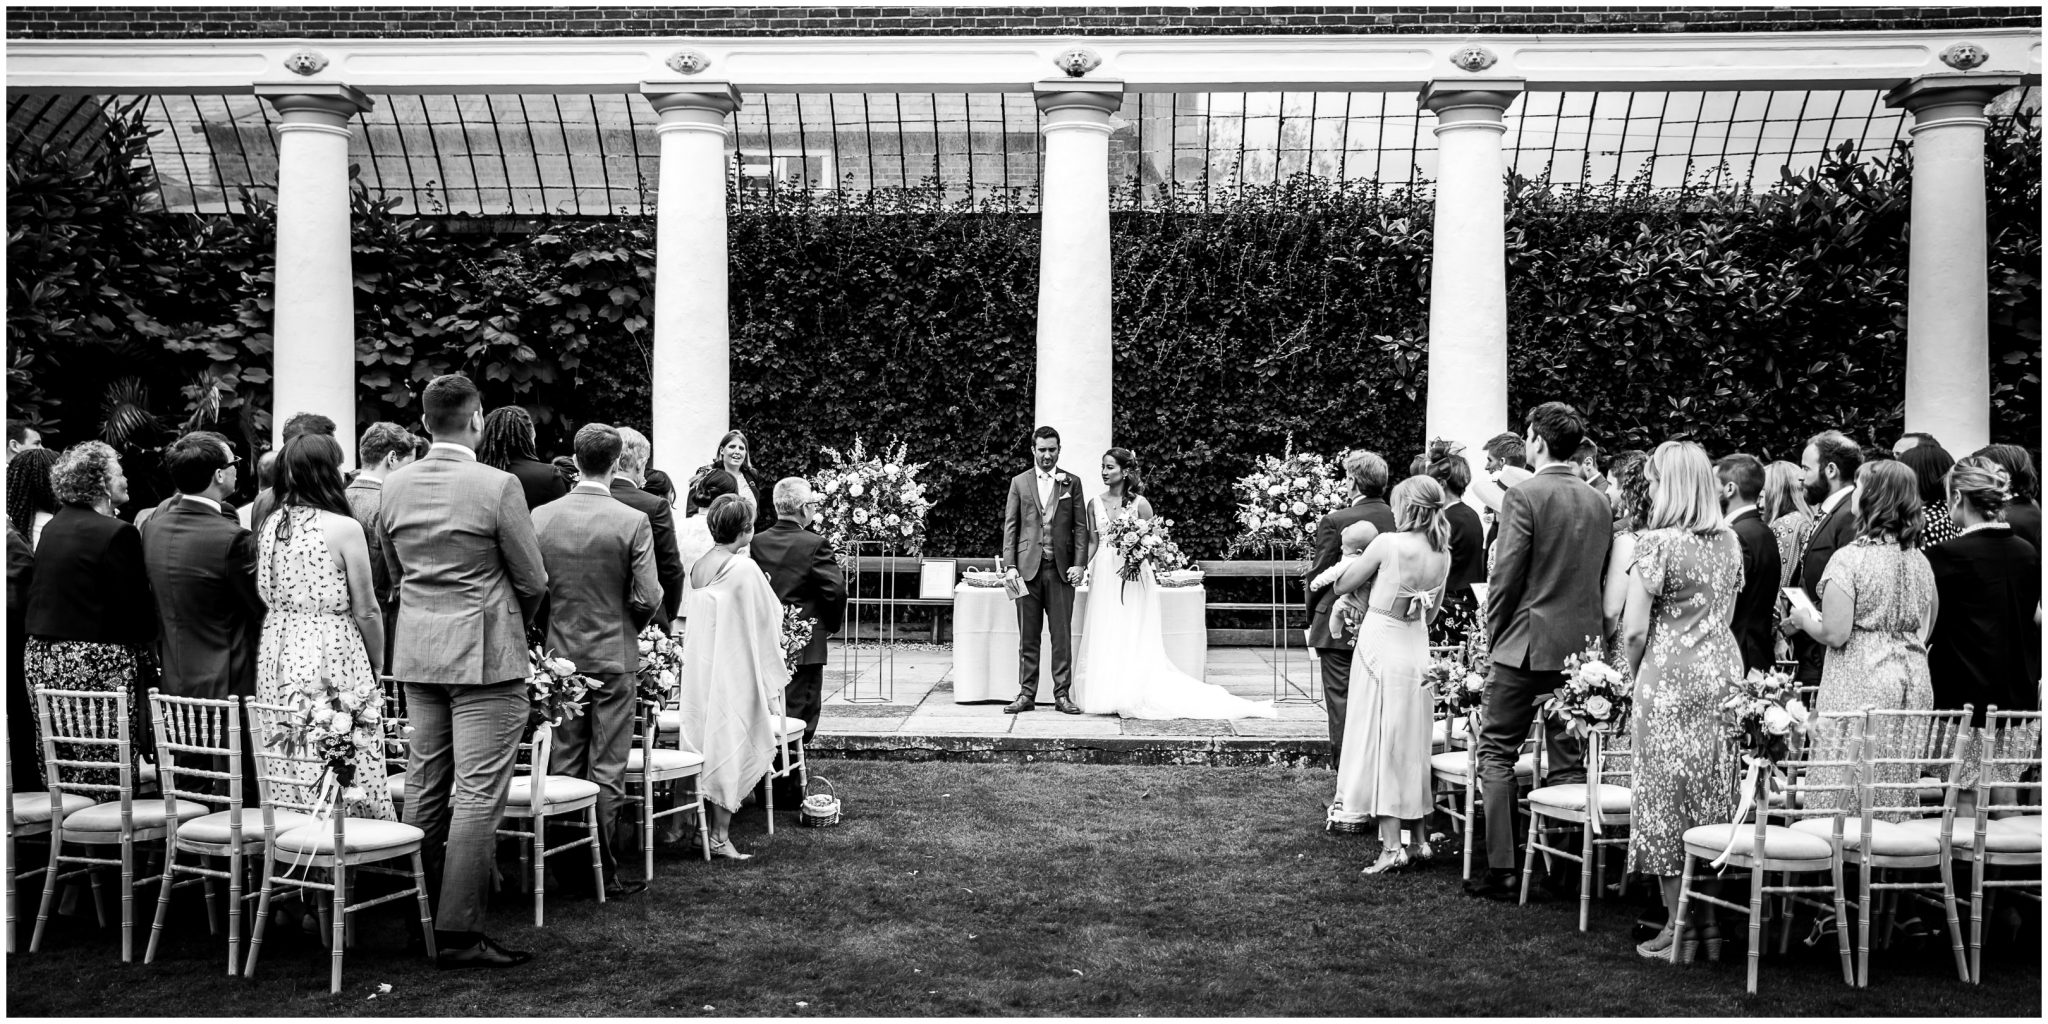 Black and white photo of bride and groom at the end of the outdoor wedding ceremony at Avington Park